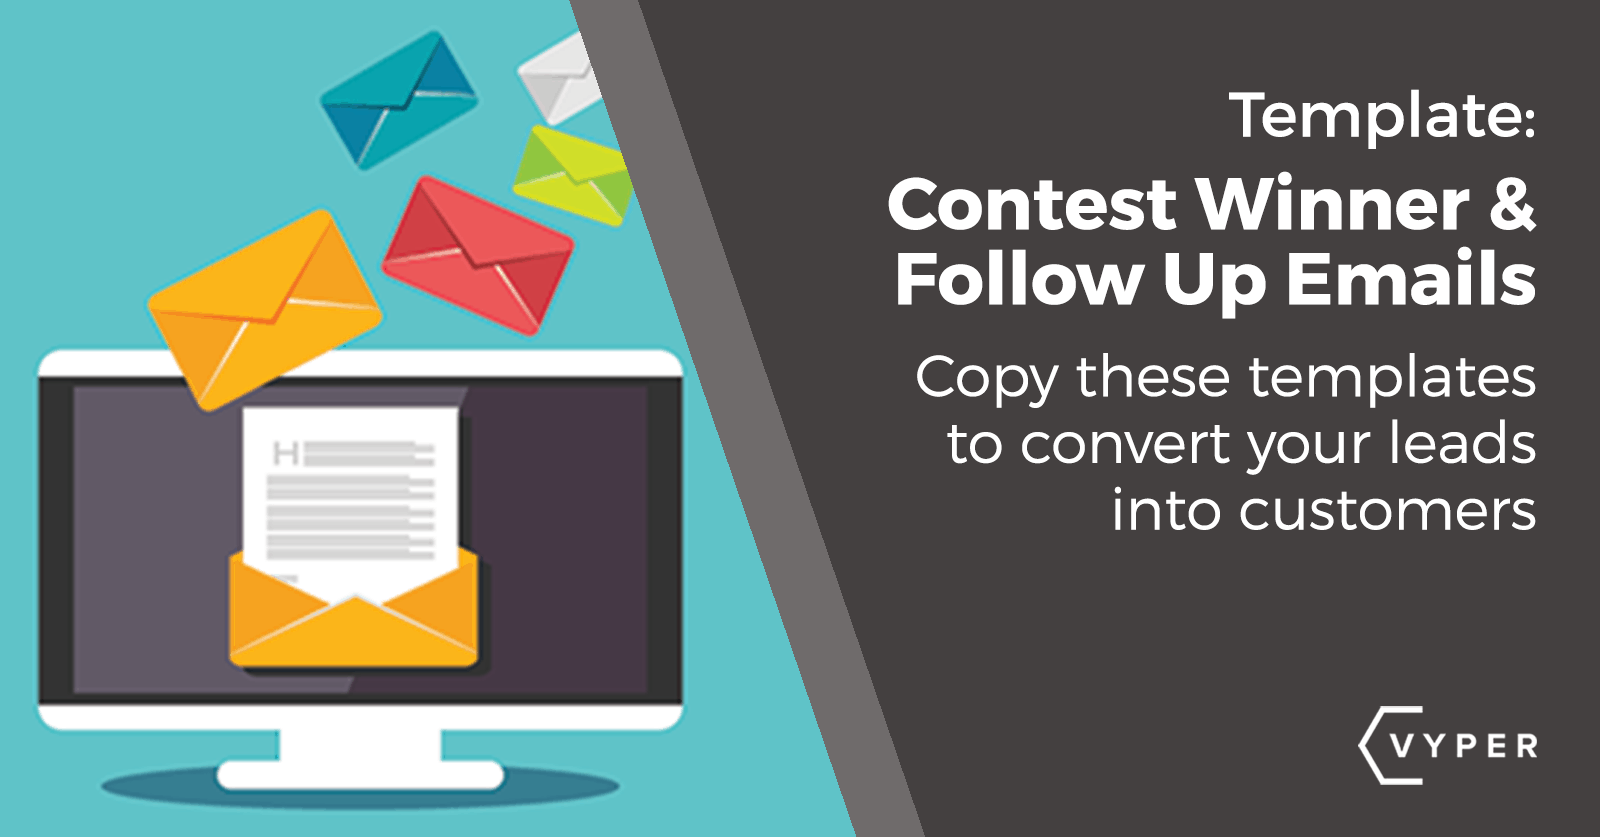 Use This Contest Winner Email & Followup to Convert Your Leads VYPER